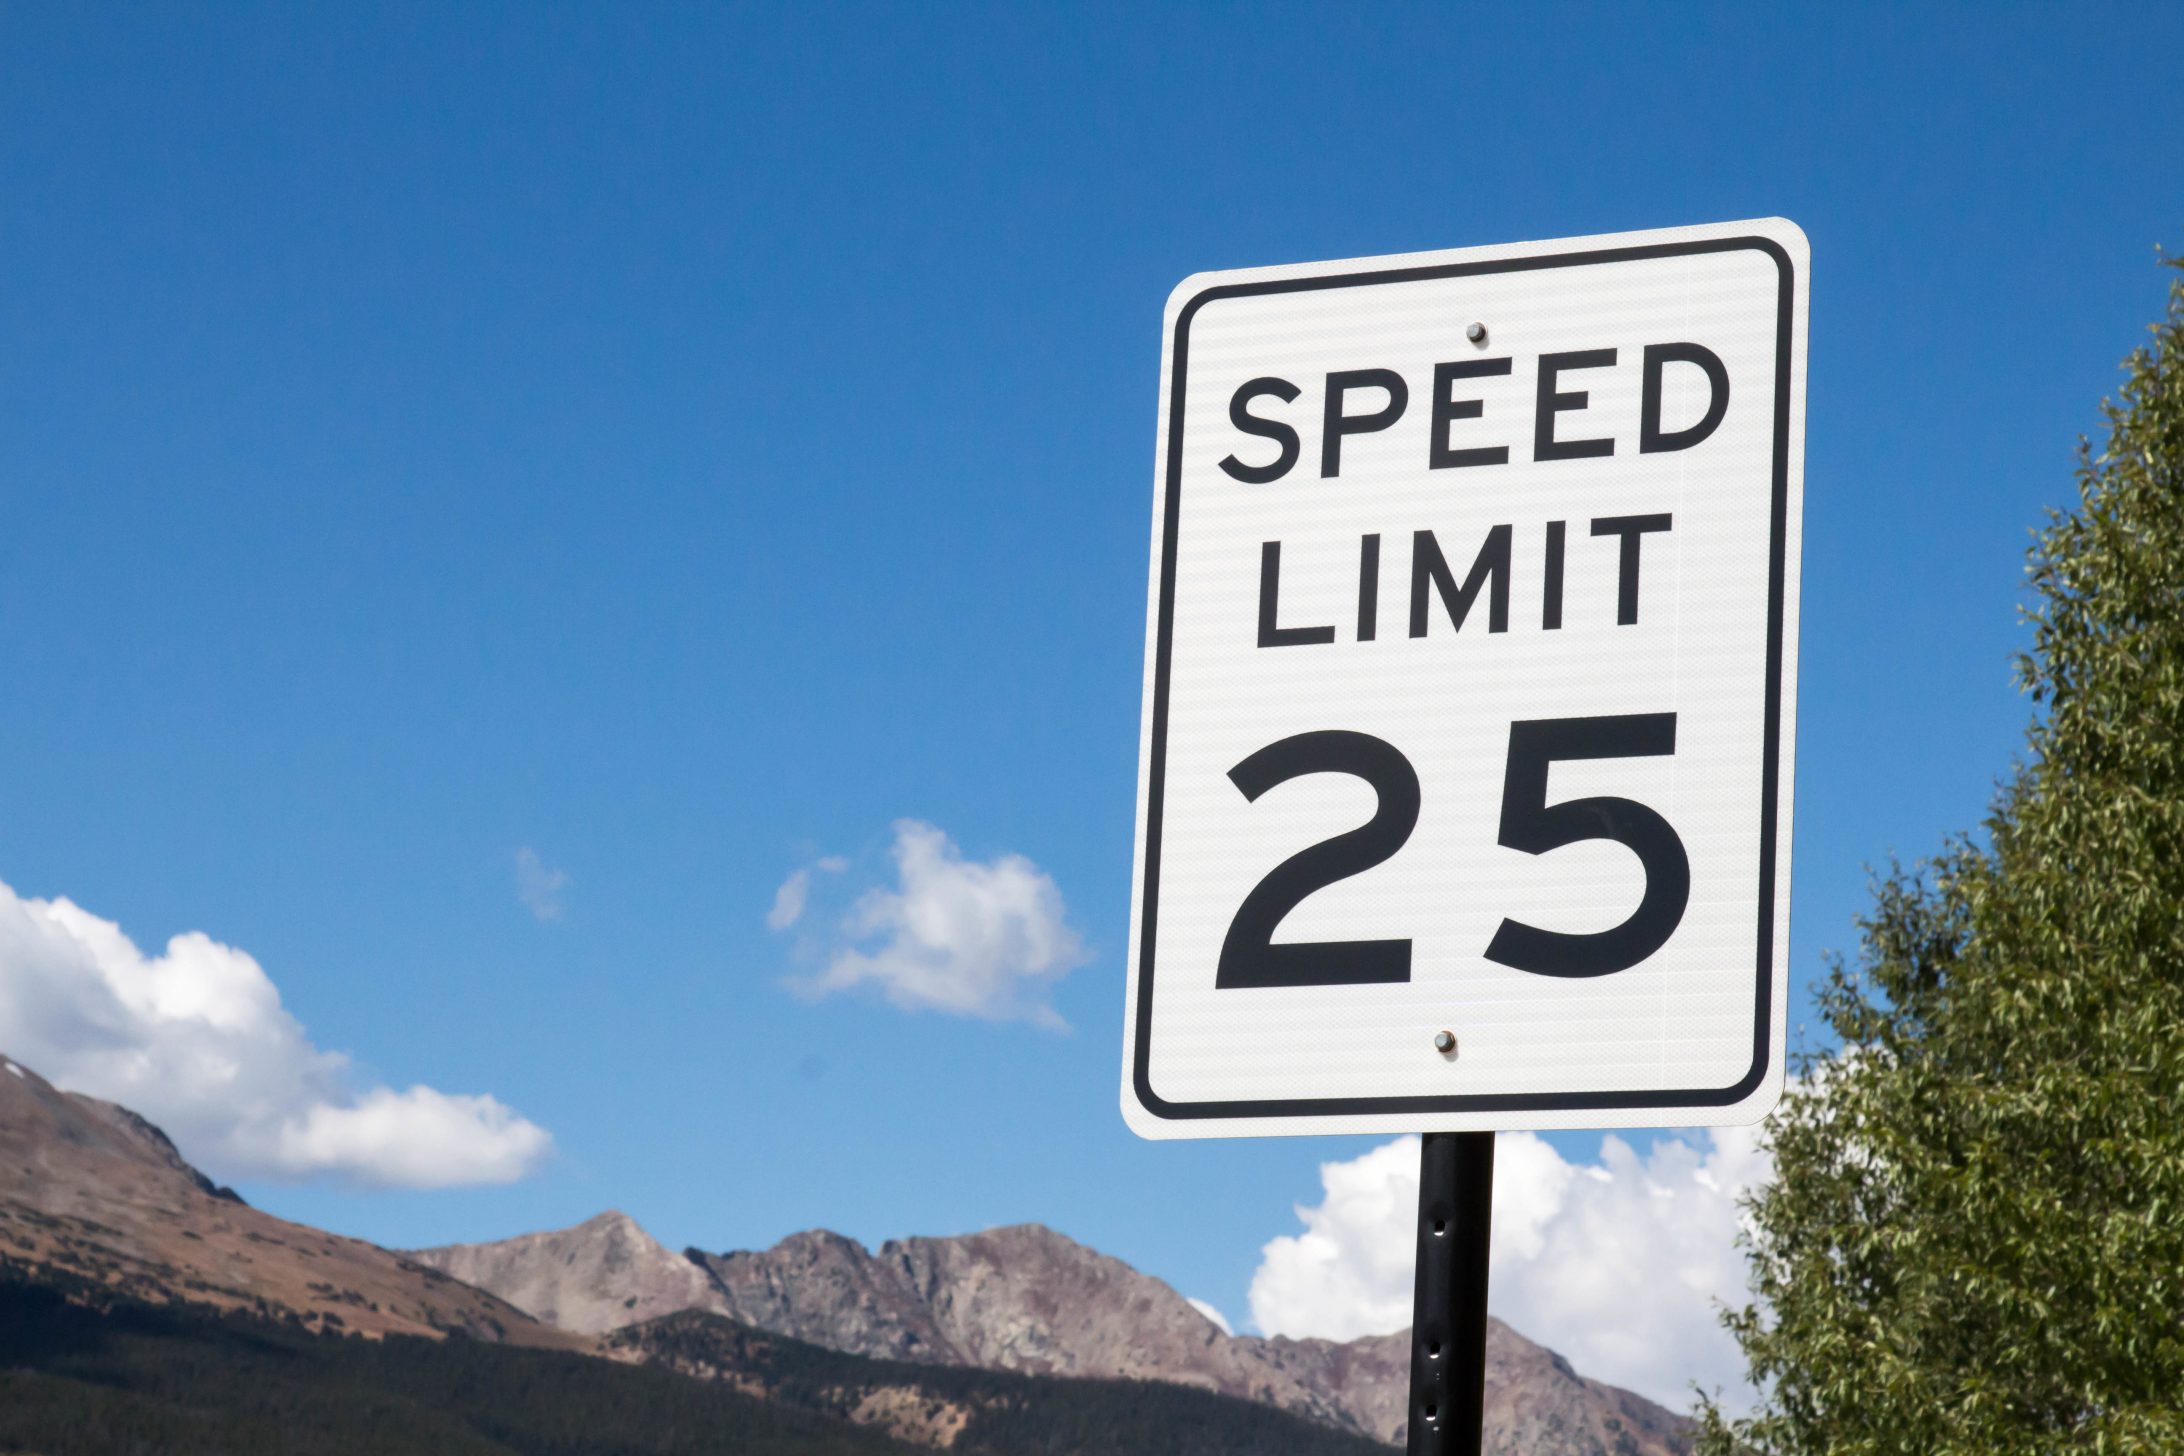 Remove speed limit: can you derestrict an electric bike? | Epic Cycles